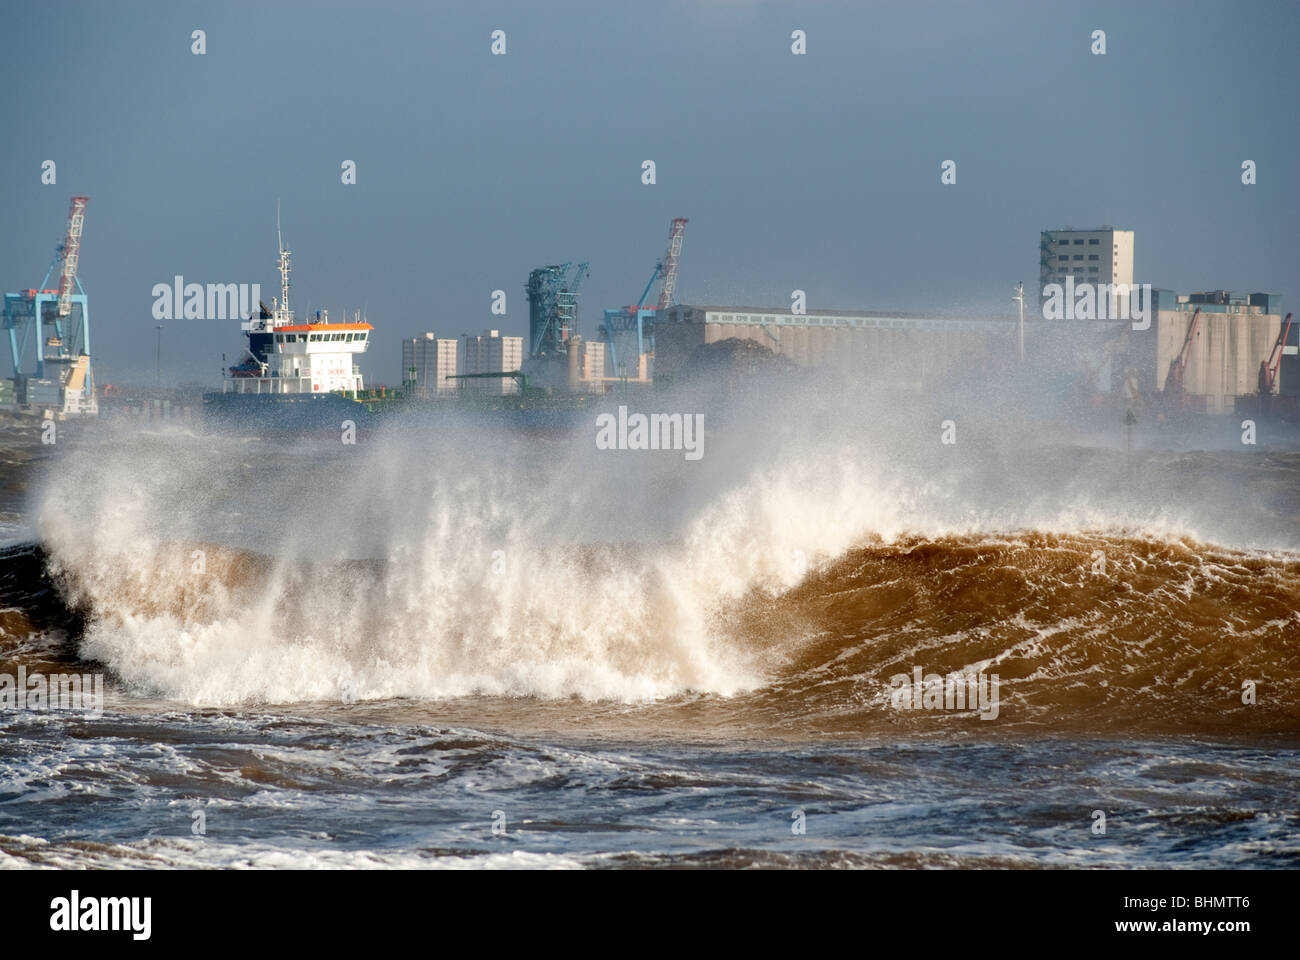 Huge waves on River Mersey obscuring container shipping vessel Stock Photo